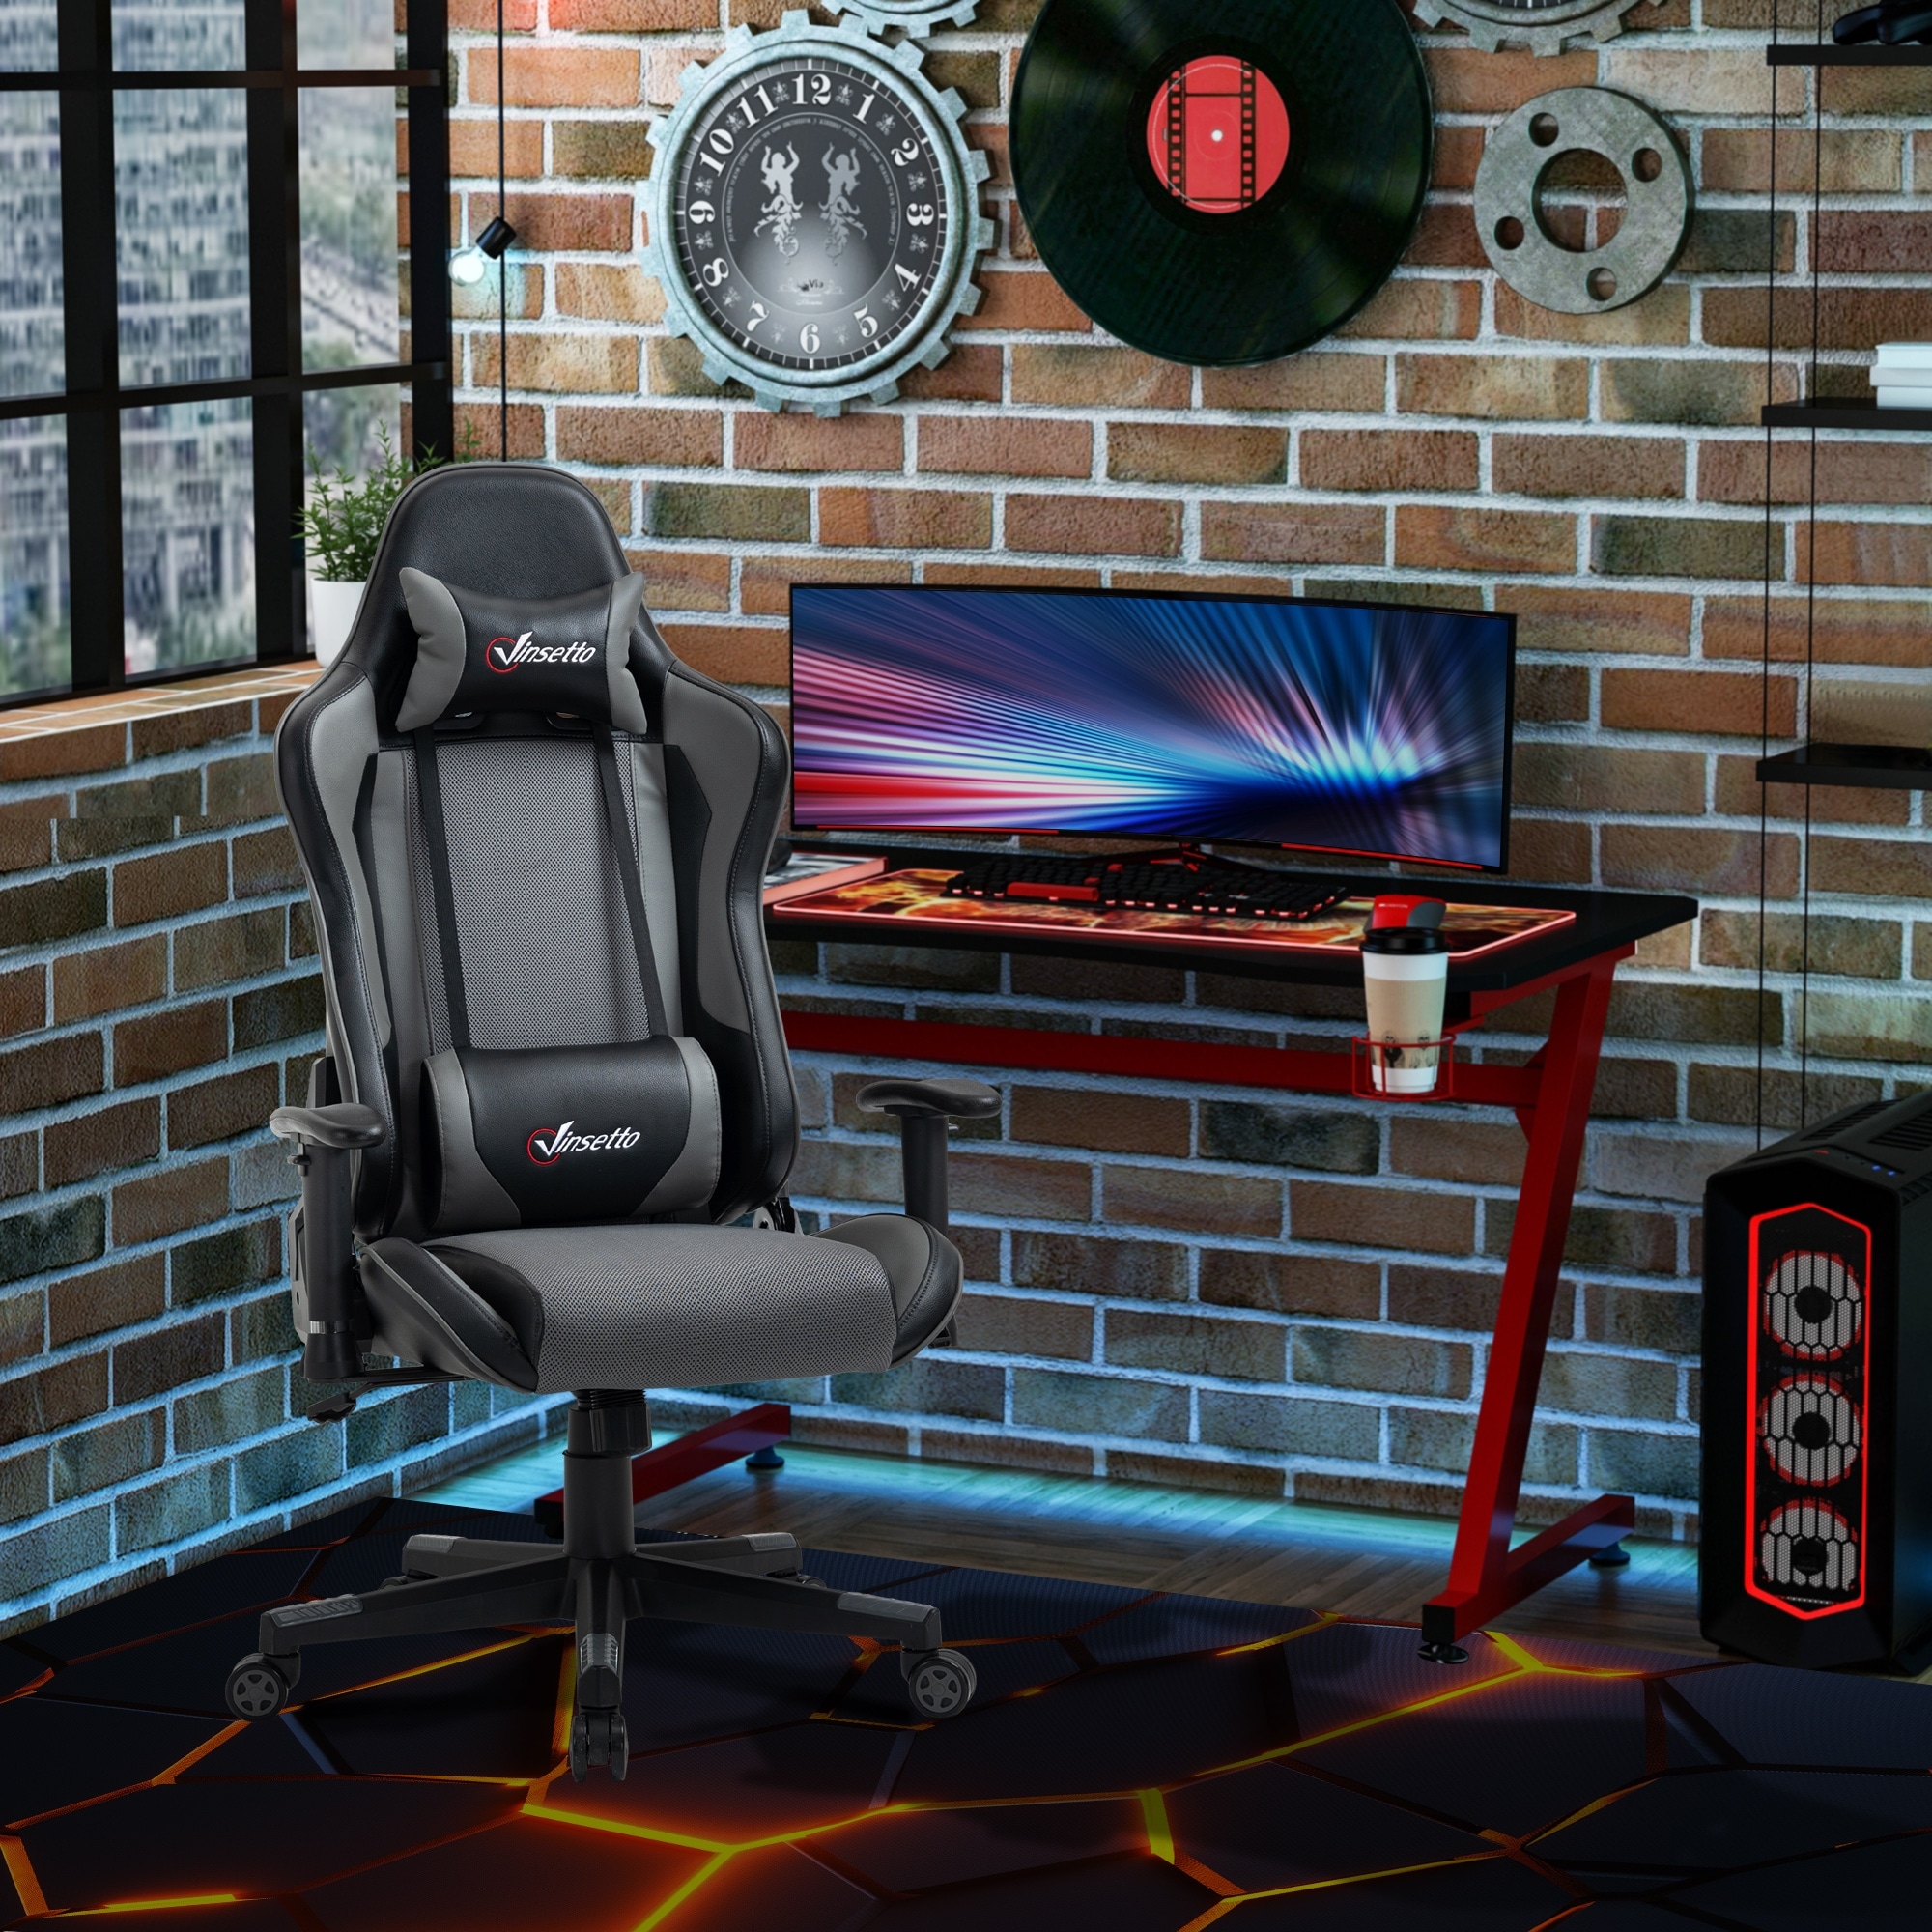 https://ak1.ostkcdn.com/images/products/is/images/direct/031d305dbc546b1cc49ac2299c5d58205e324e92/Vinsetto-Gaming-Chair-Racing-Style-Ergonomic-Office-Chair-High-Back-Computer-Desk-Chair-Adjustable-Height-Swivel-Recliner.jpg